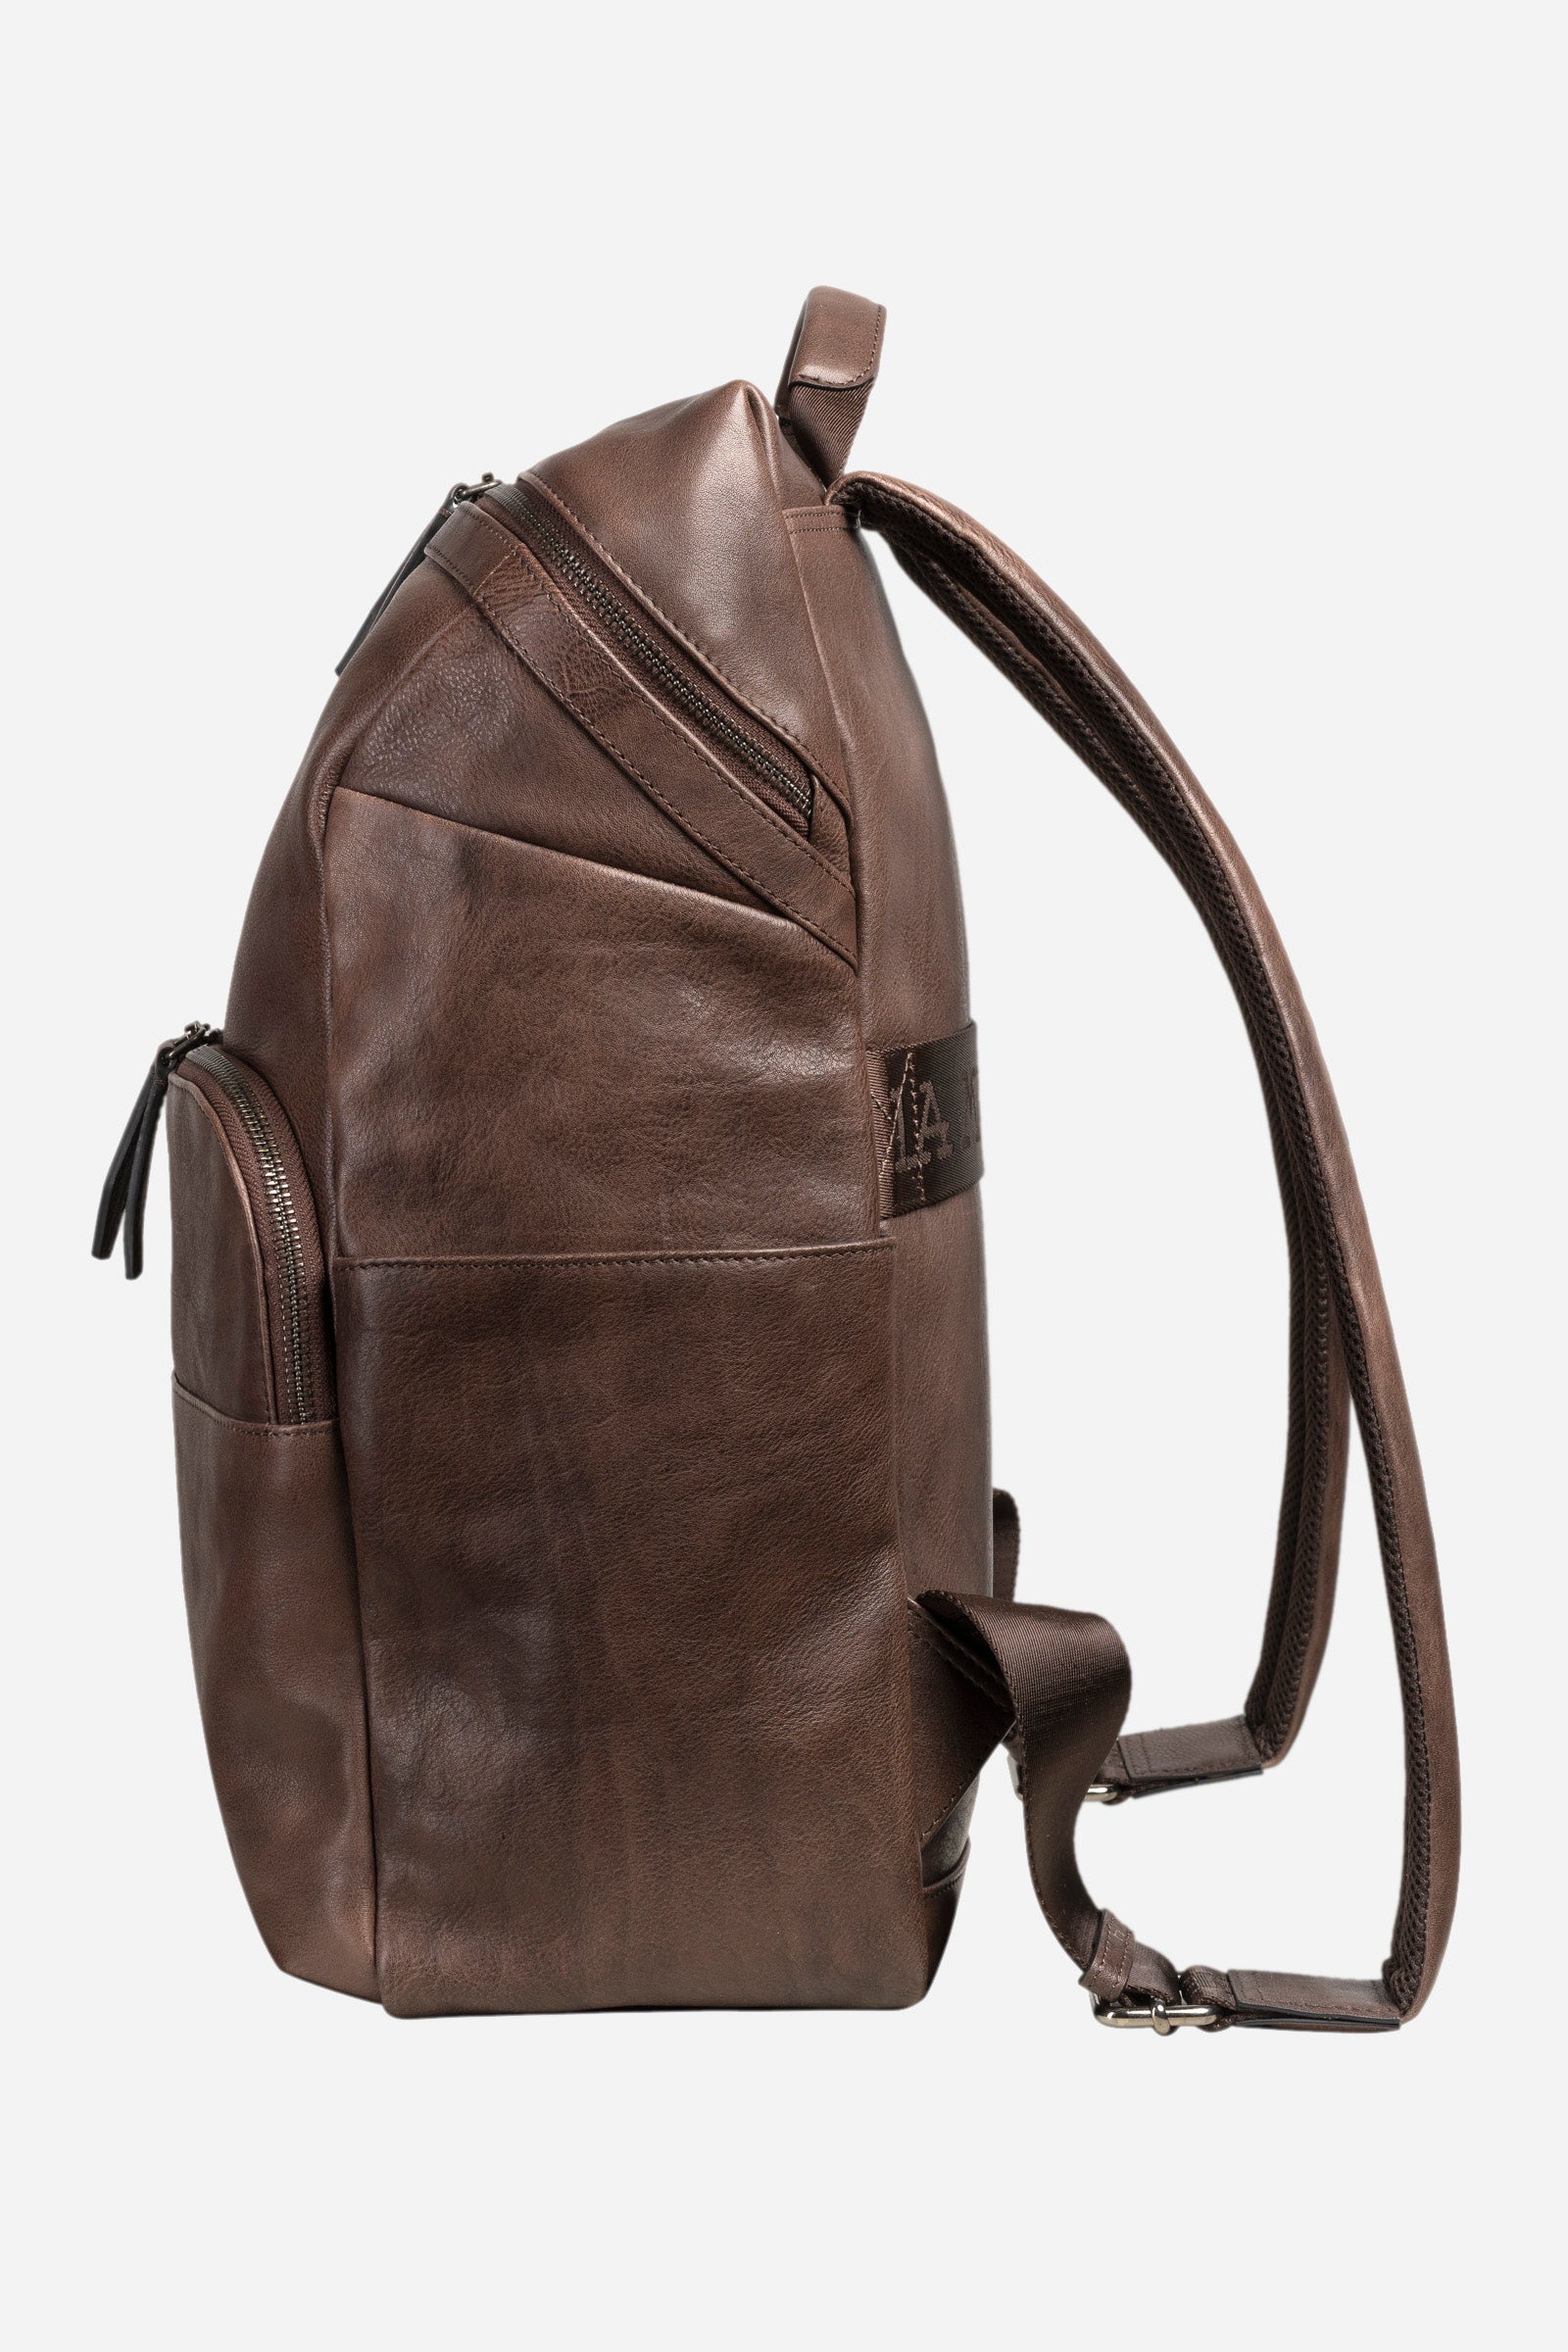 Men's leather backpack - Miguel